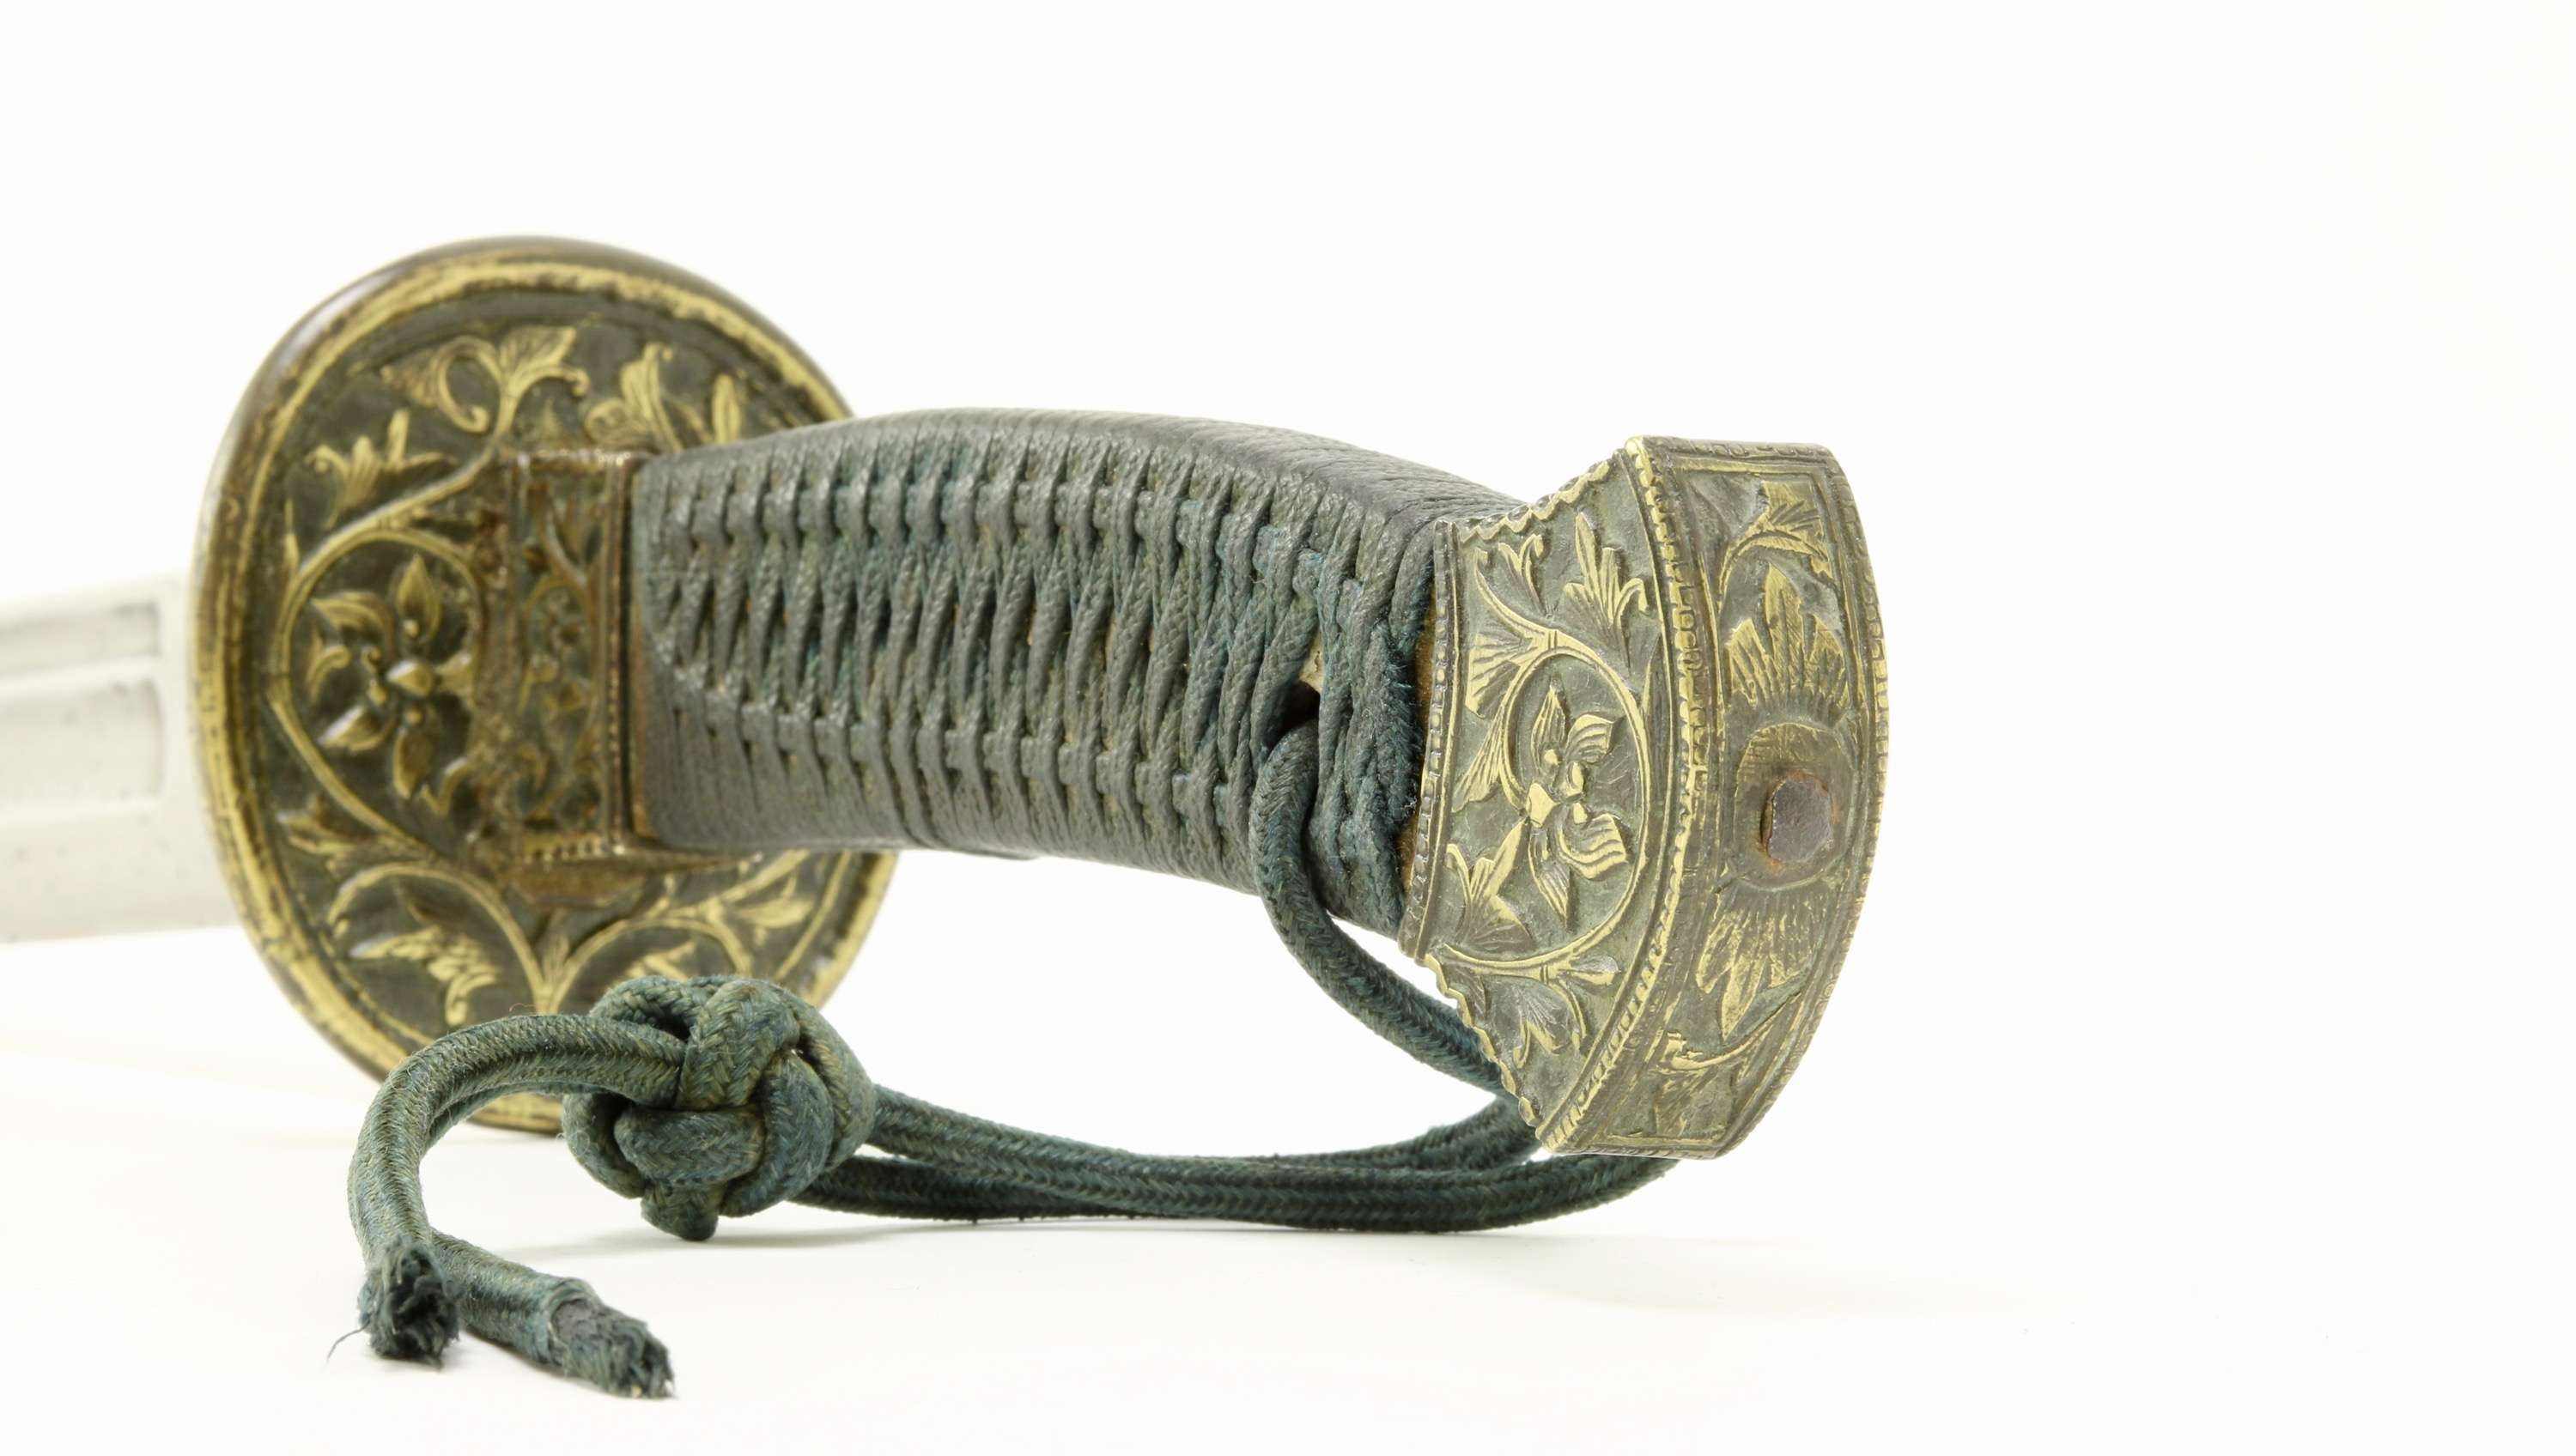 Antique Chinese officer saber in the angular style